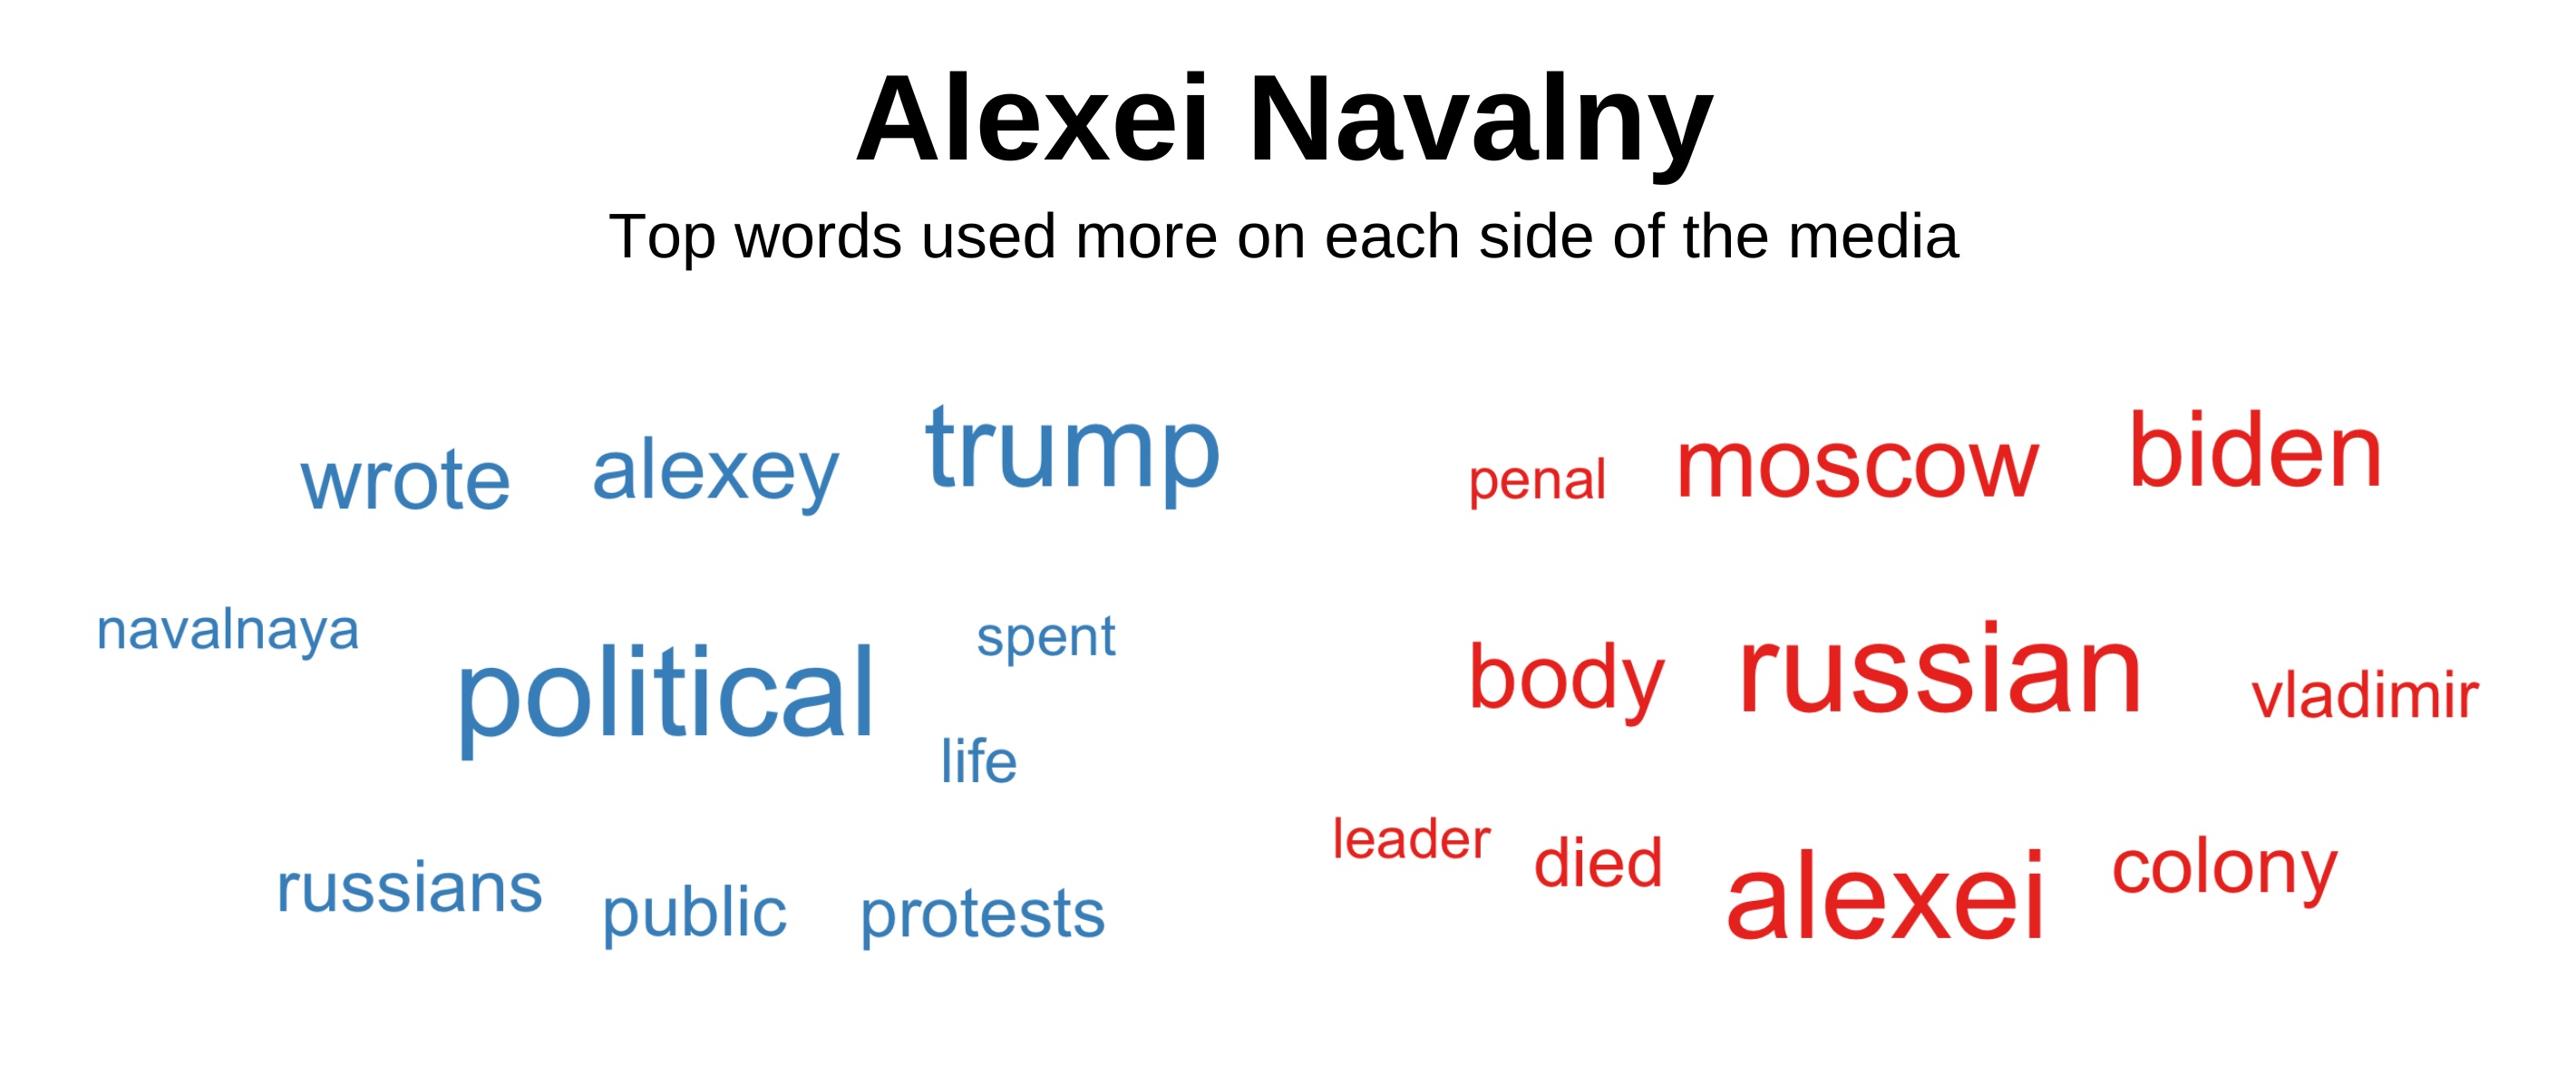 Top words about Alexei Navalny impeachment used more on each side of the media.